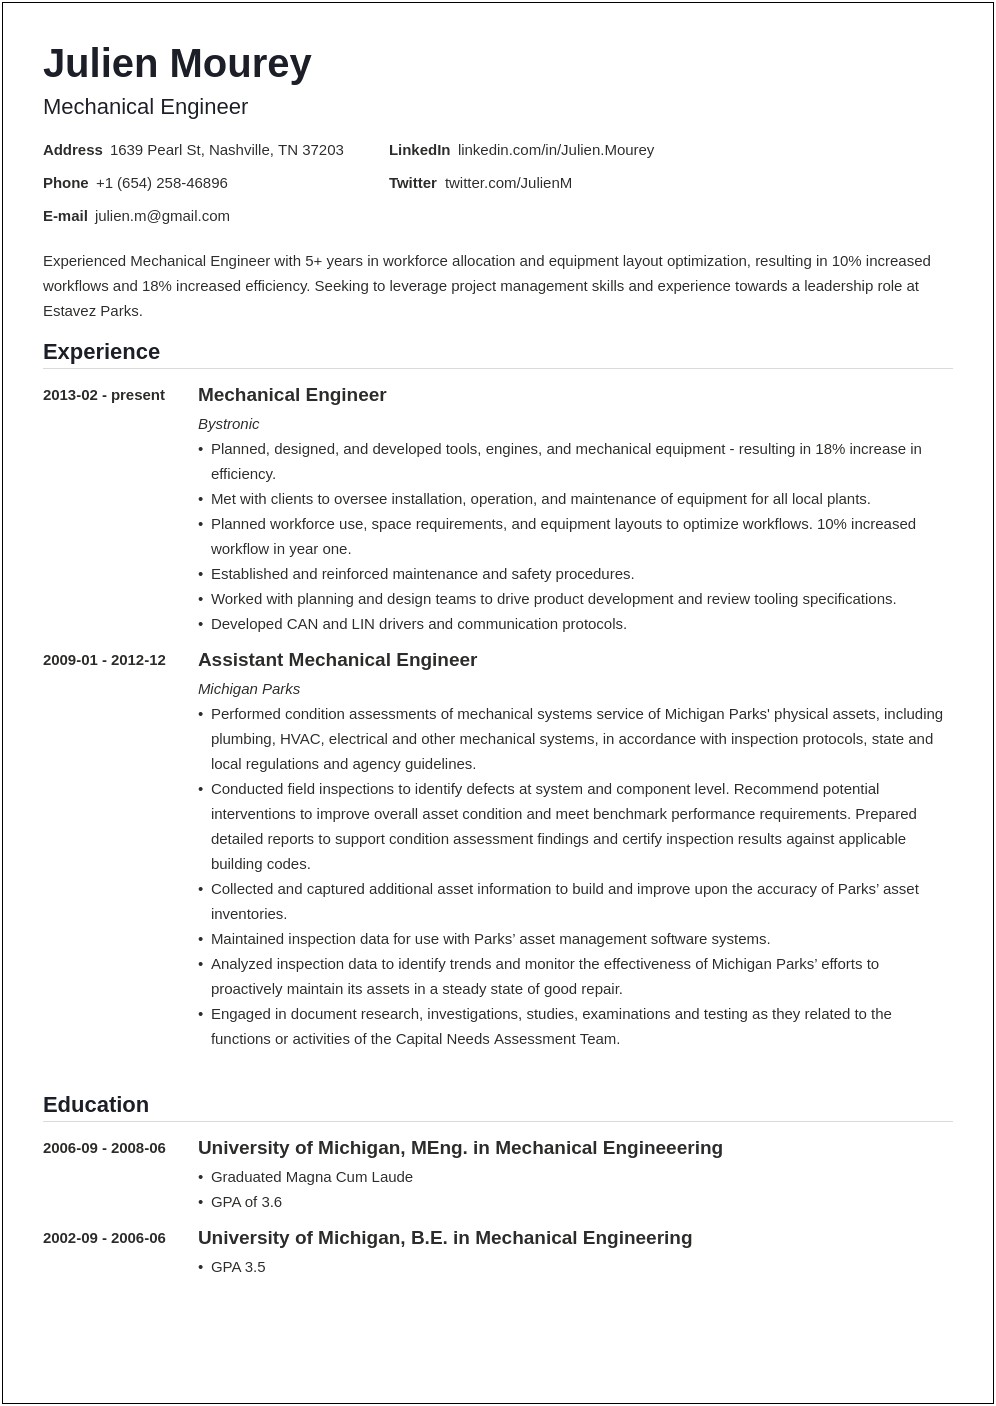 Resume Objective Examples For Mechanical Engineering